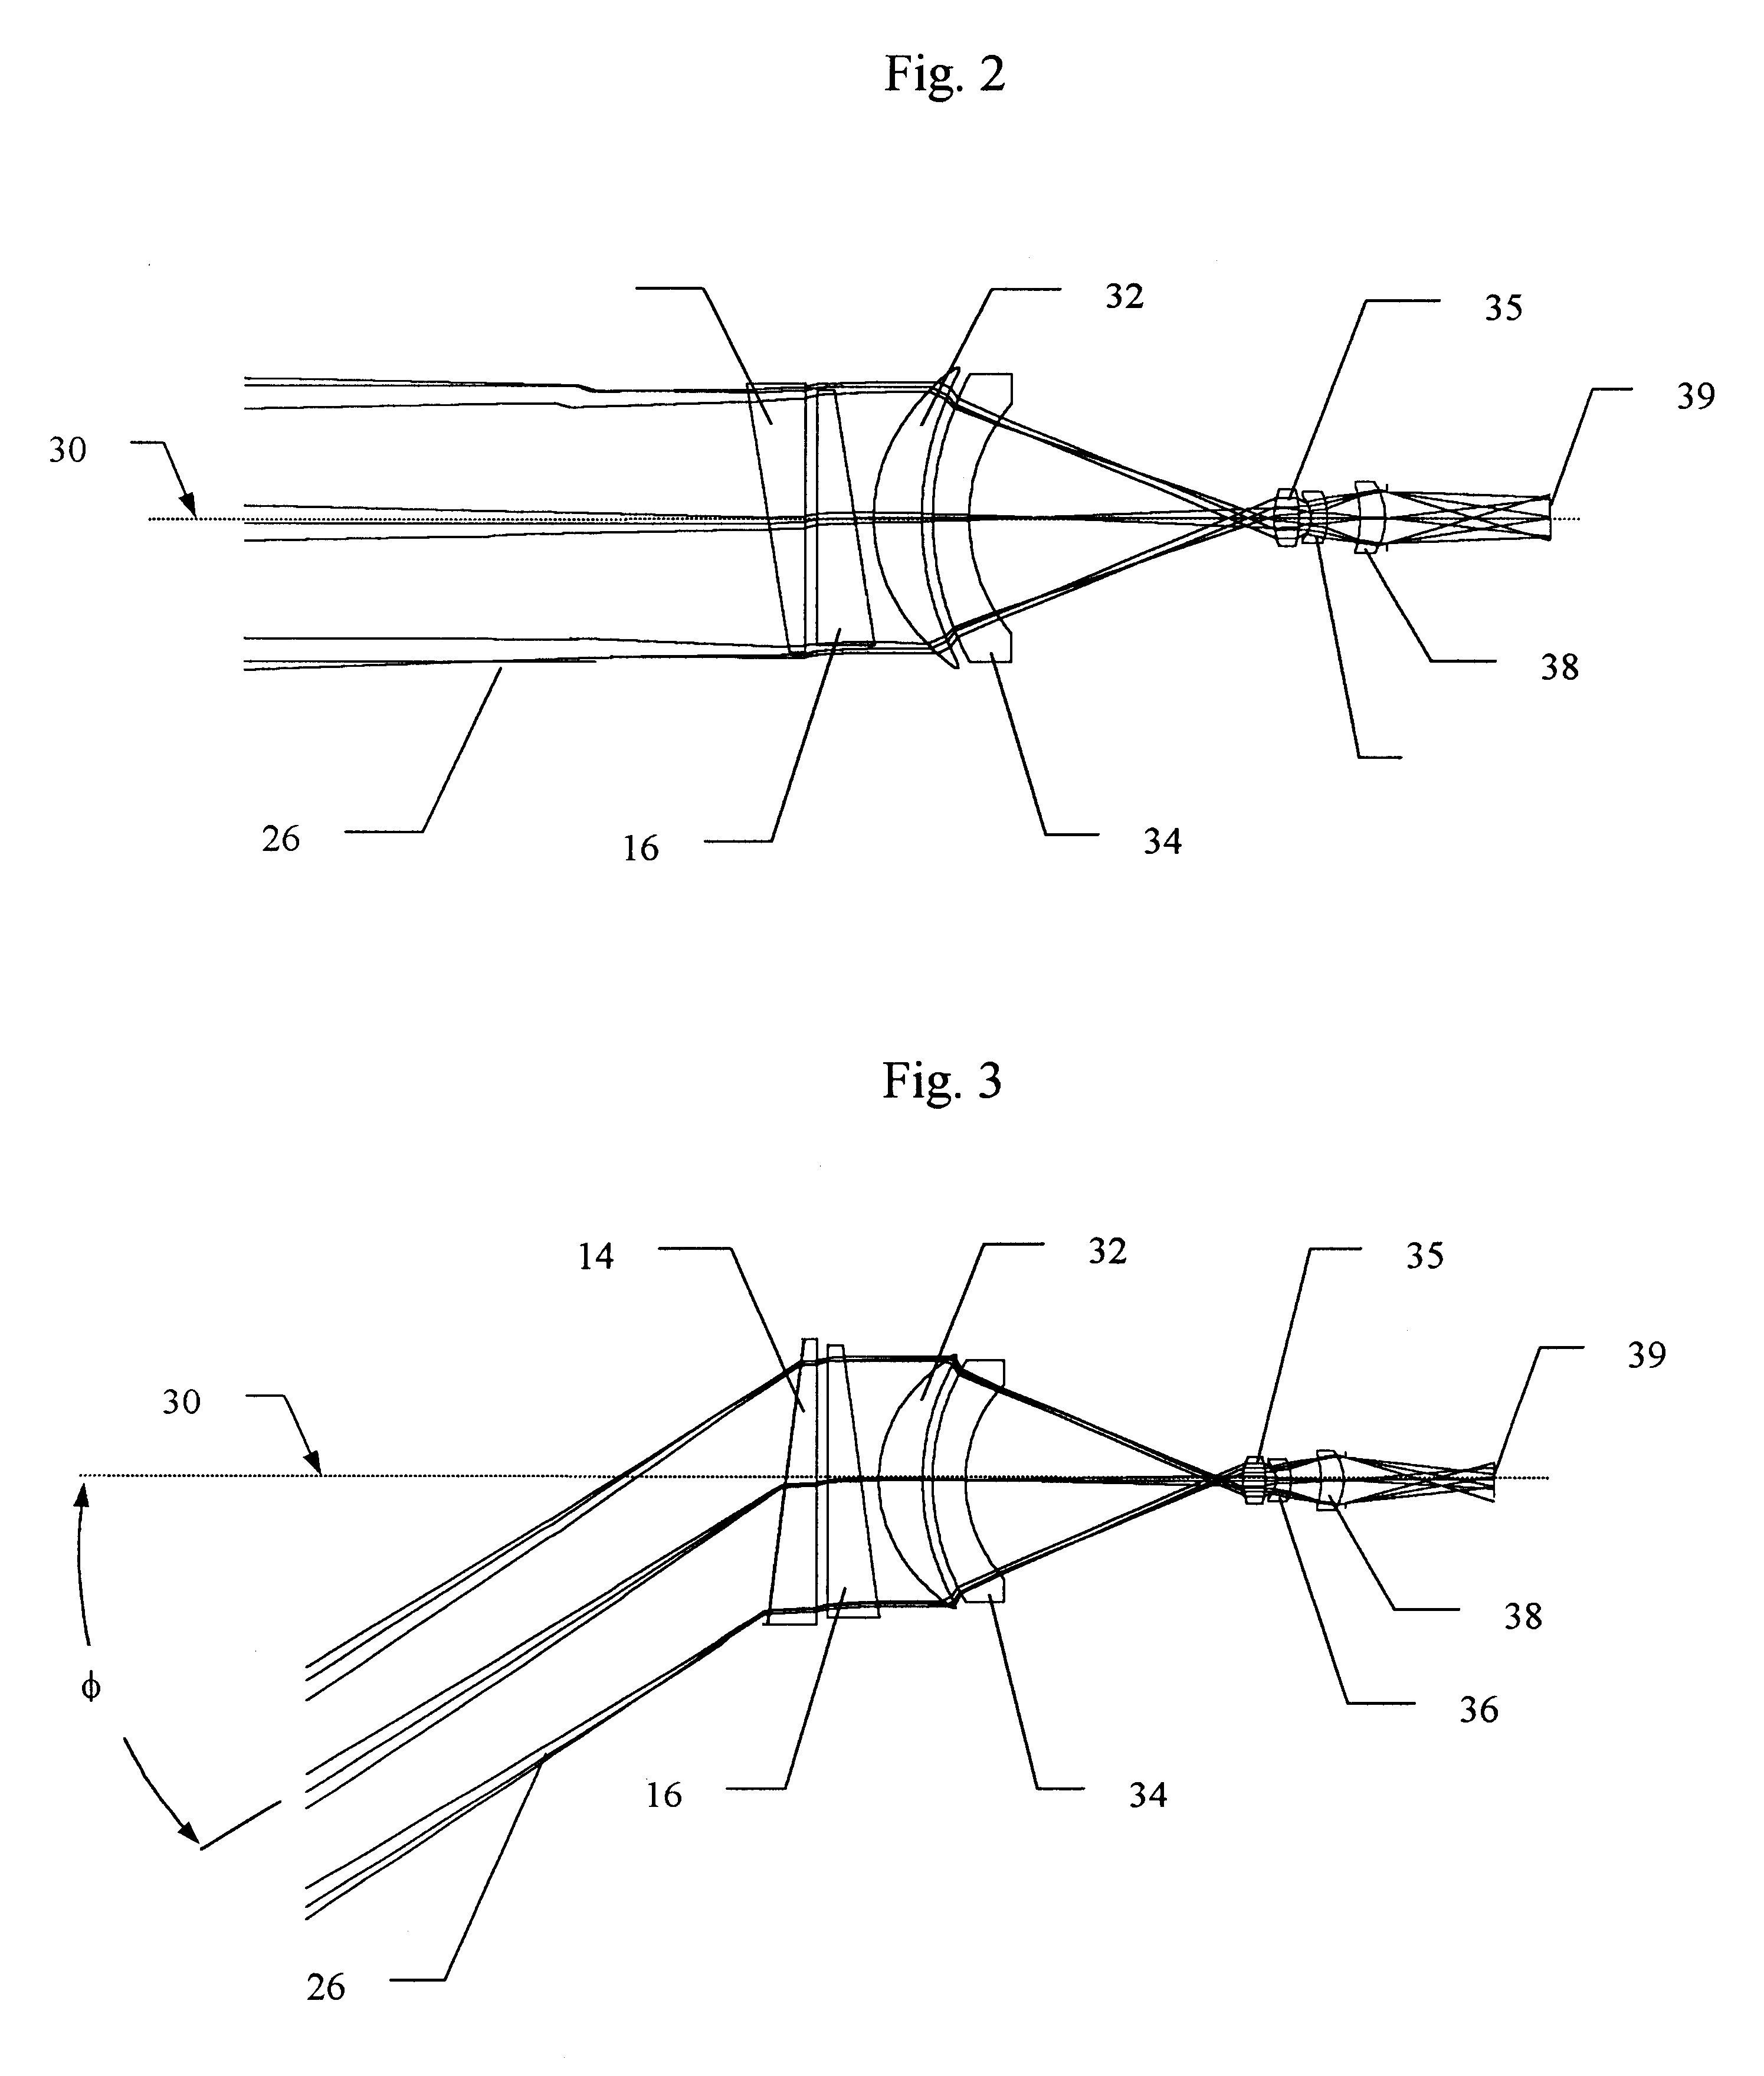 Beam steering optical arrangement using Risley prisms with surface contours for aberration correction